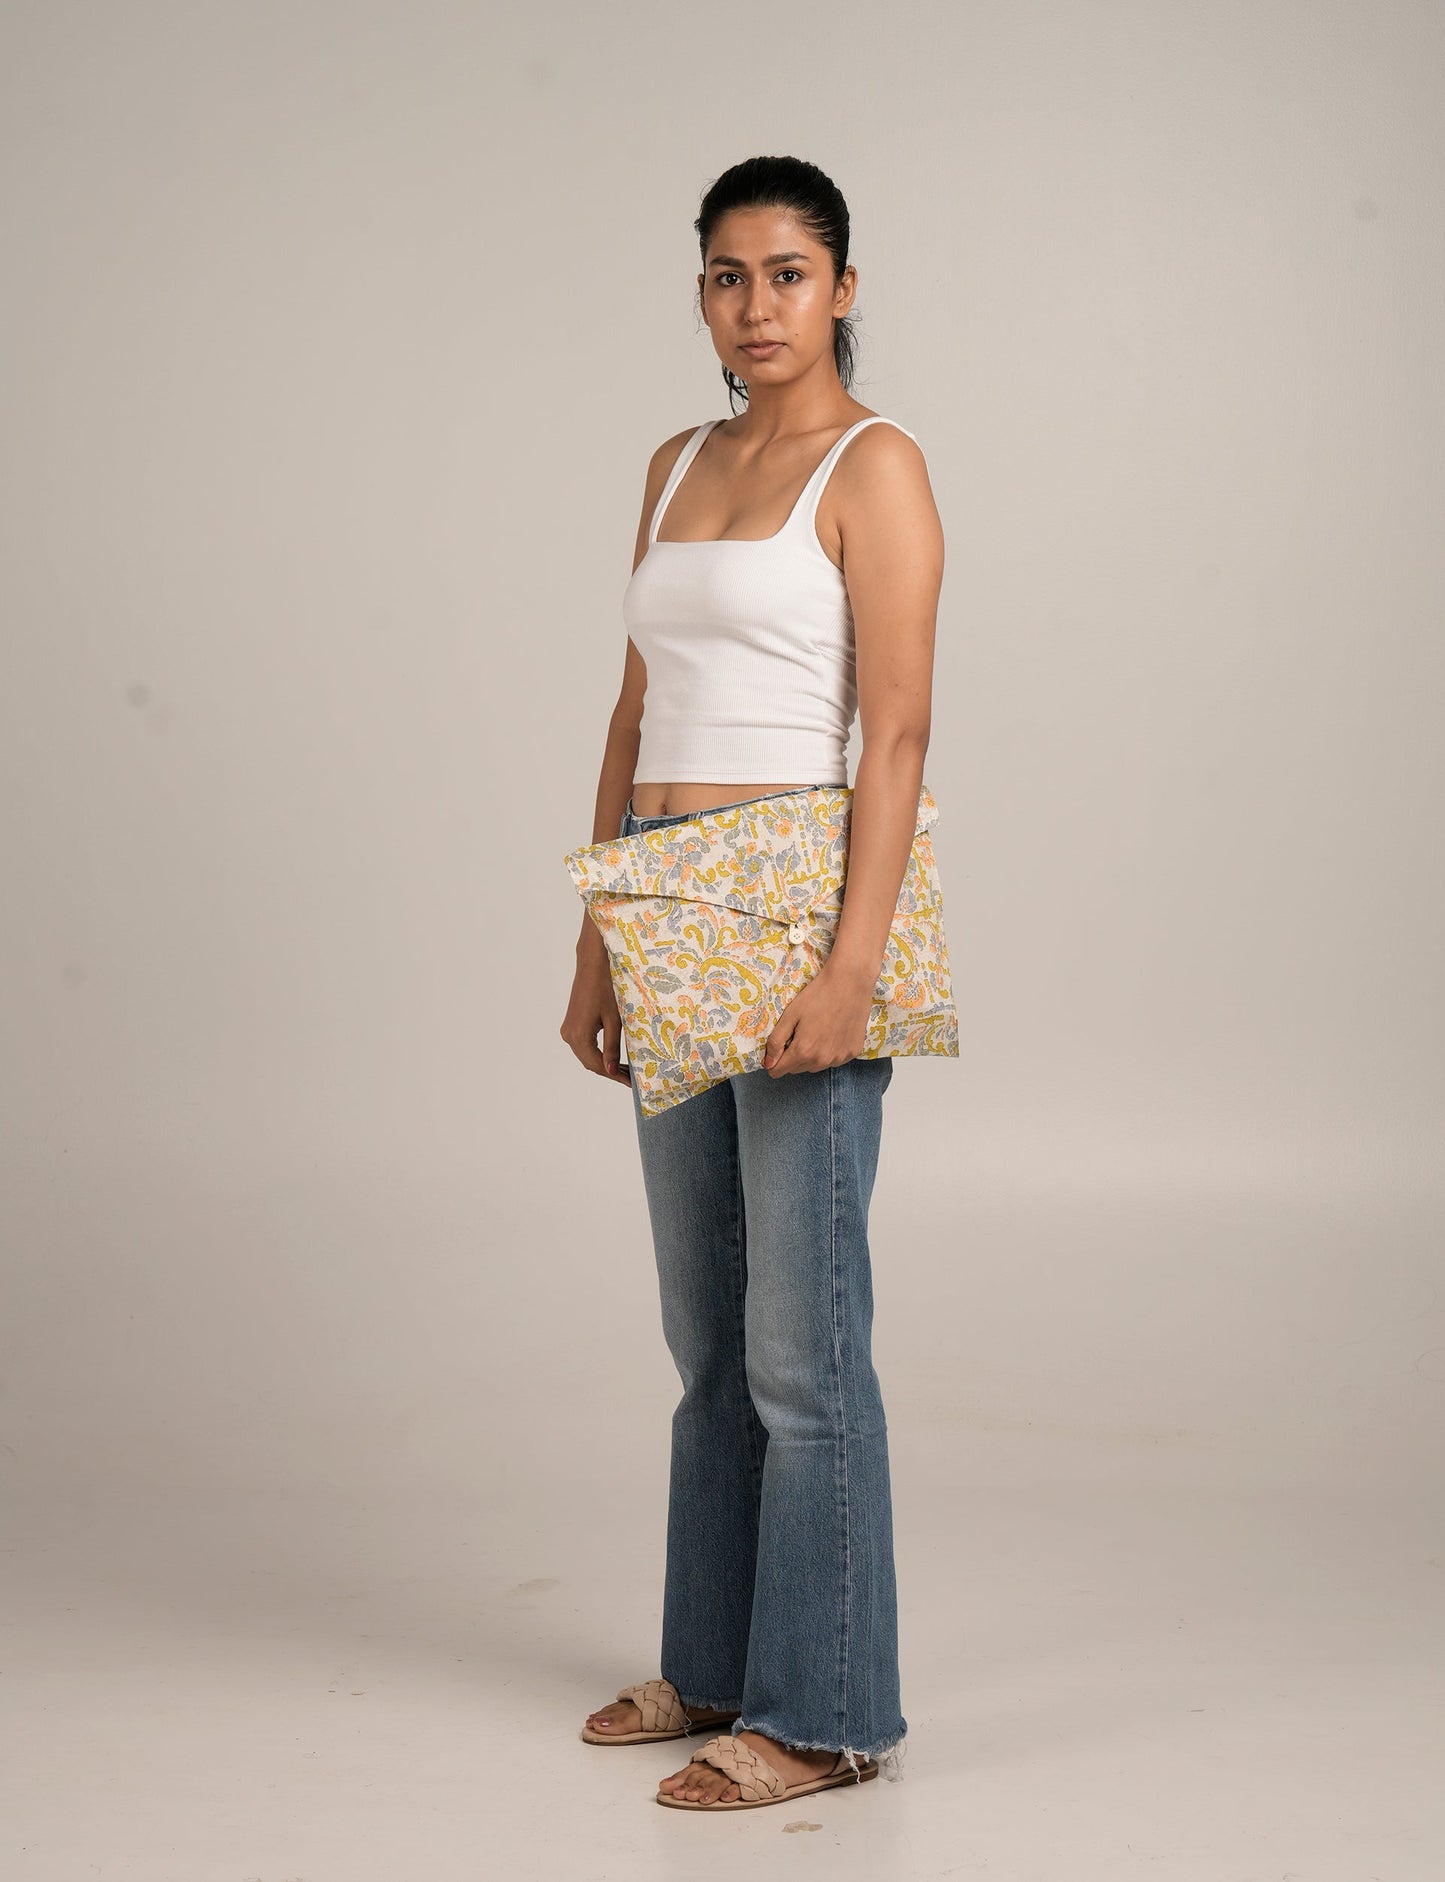 Explore our Travel Set, a stylish solution for organizing tech accessories, chargers, jewelry, and small items. Crafted from upcycled materials, these pouches embody ethical fashion and sustainability, making your travels both chic and eco-friendly.